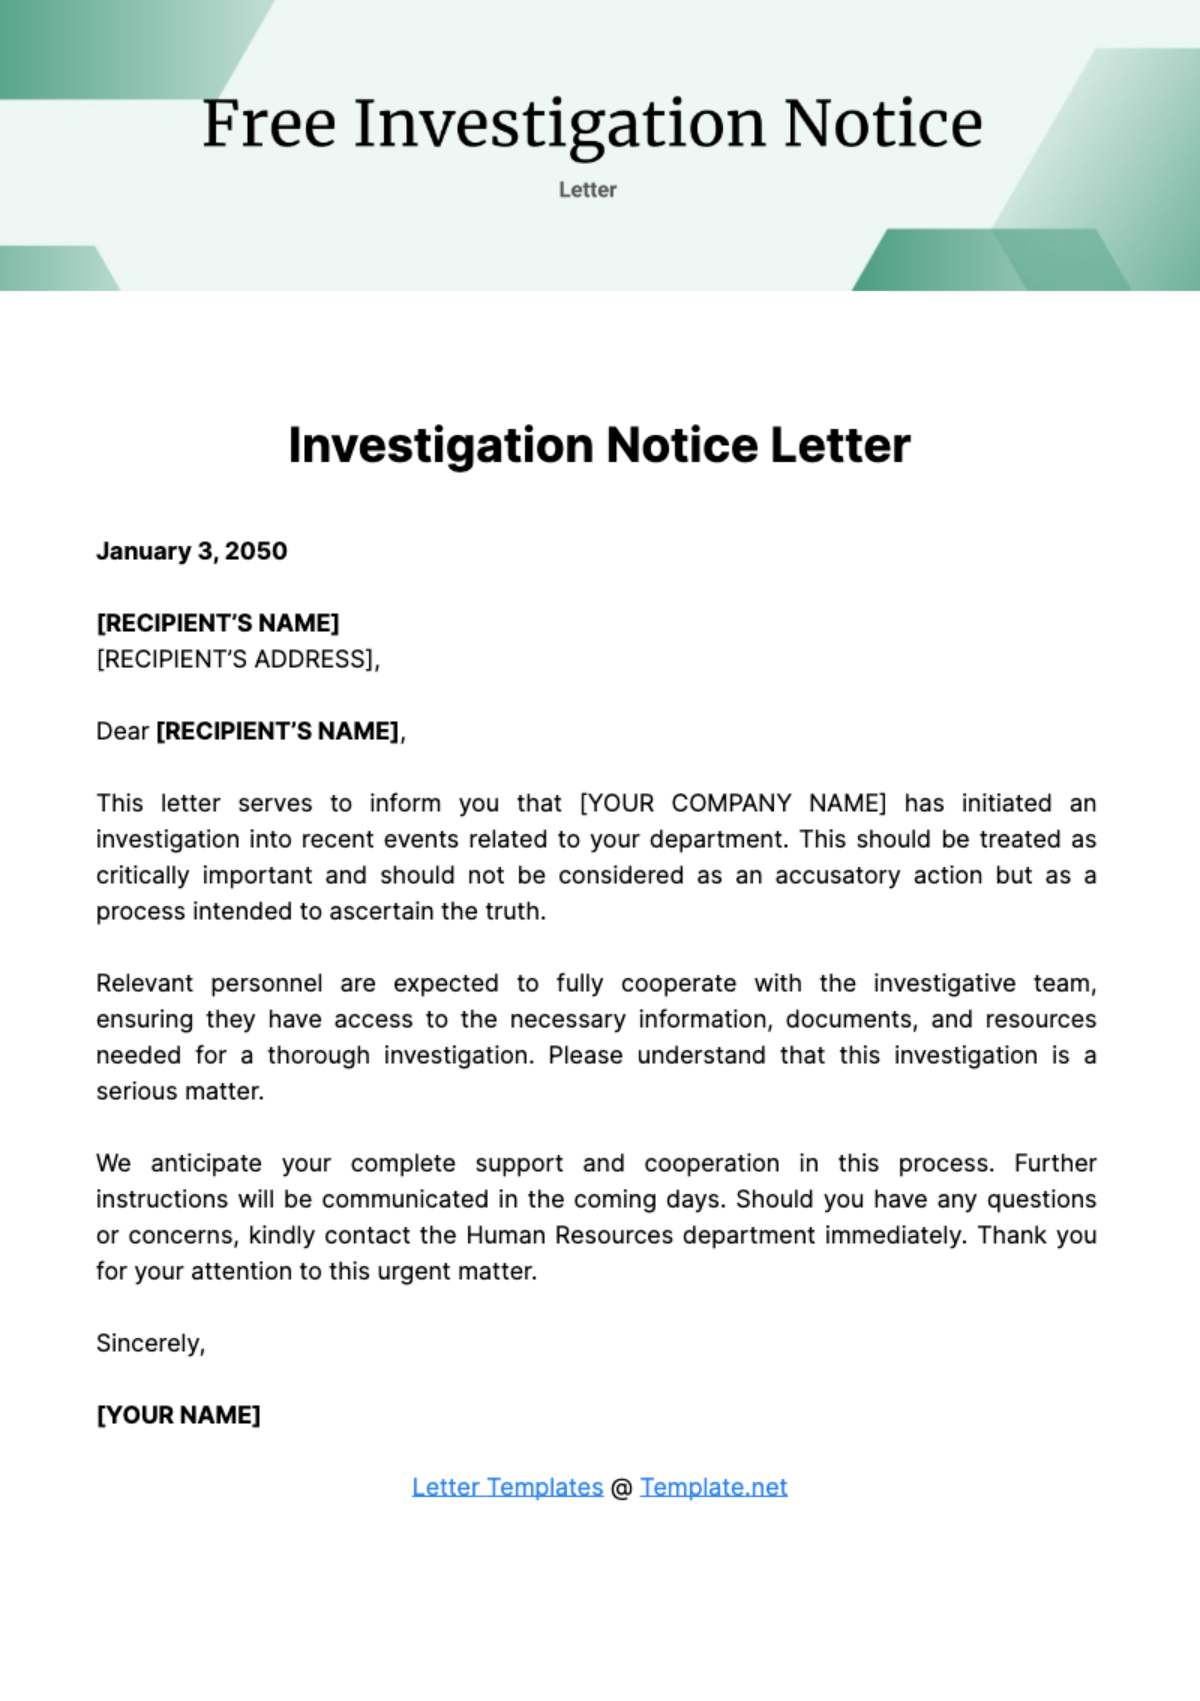 Free Investigation Notice Letter Template